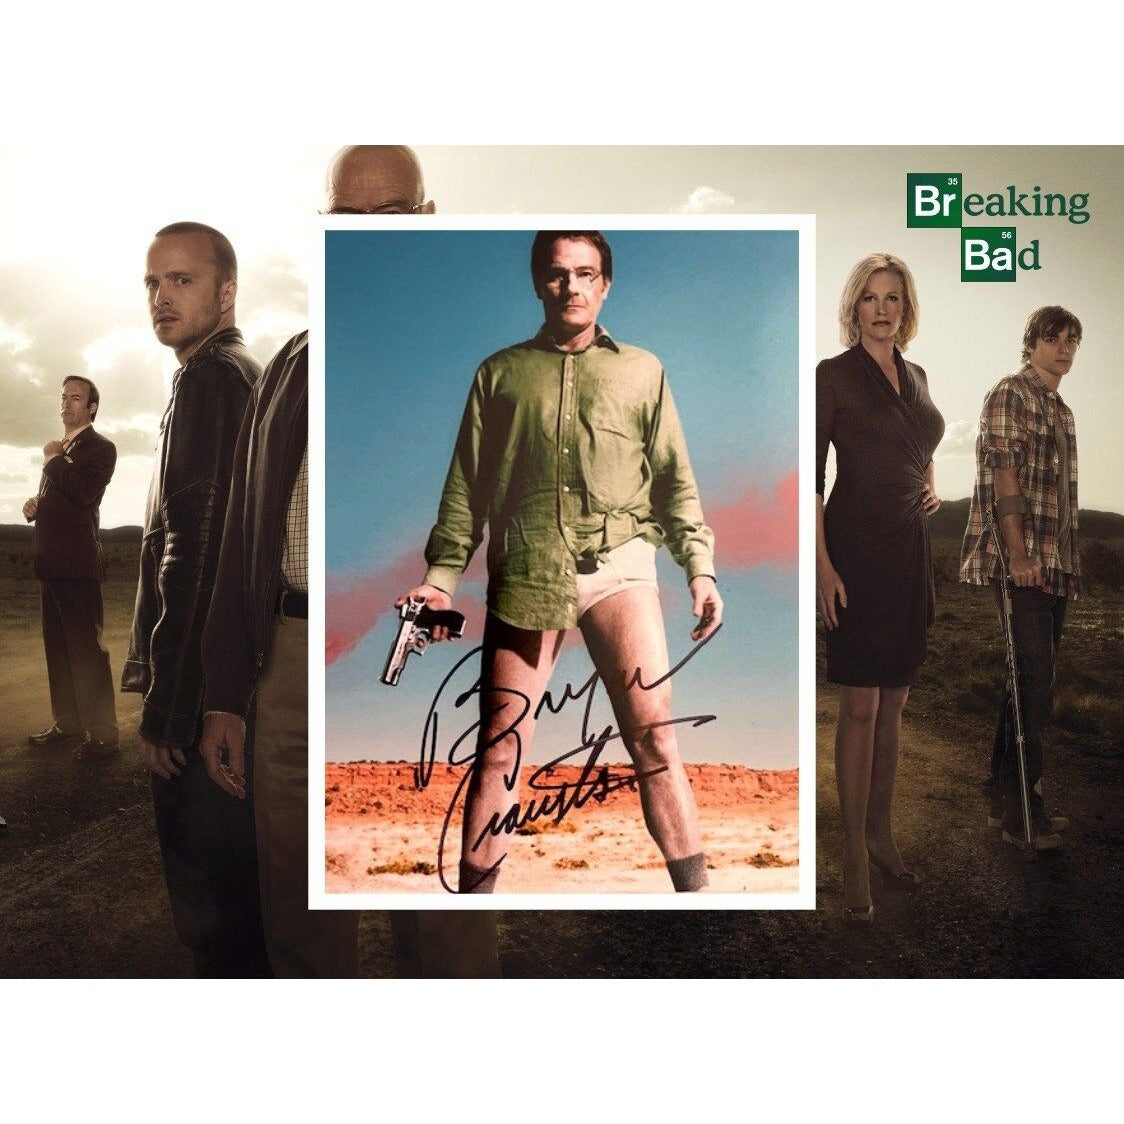 Walter White Bryan Cranston Breaking Bad 5 x 7 photo signed with proof